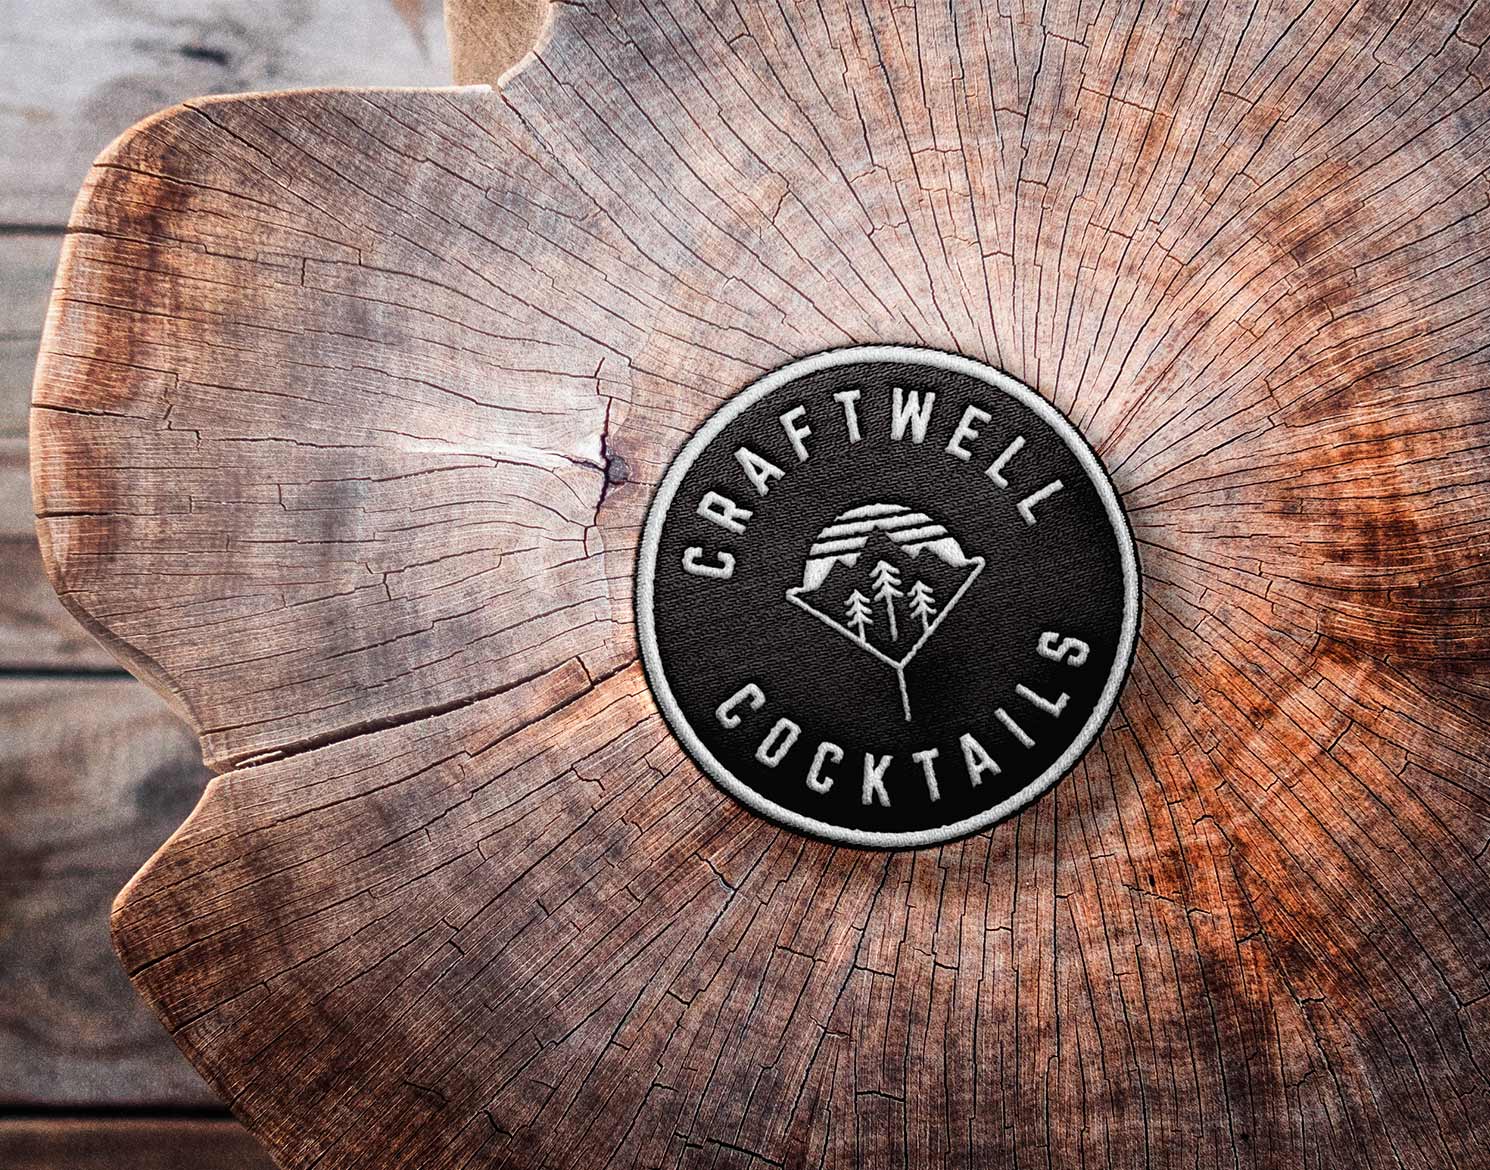 Craftwell Cocktails logo embroidered patch on wood stump